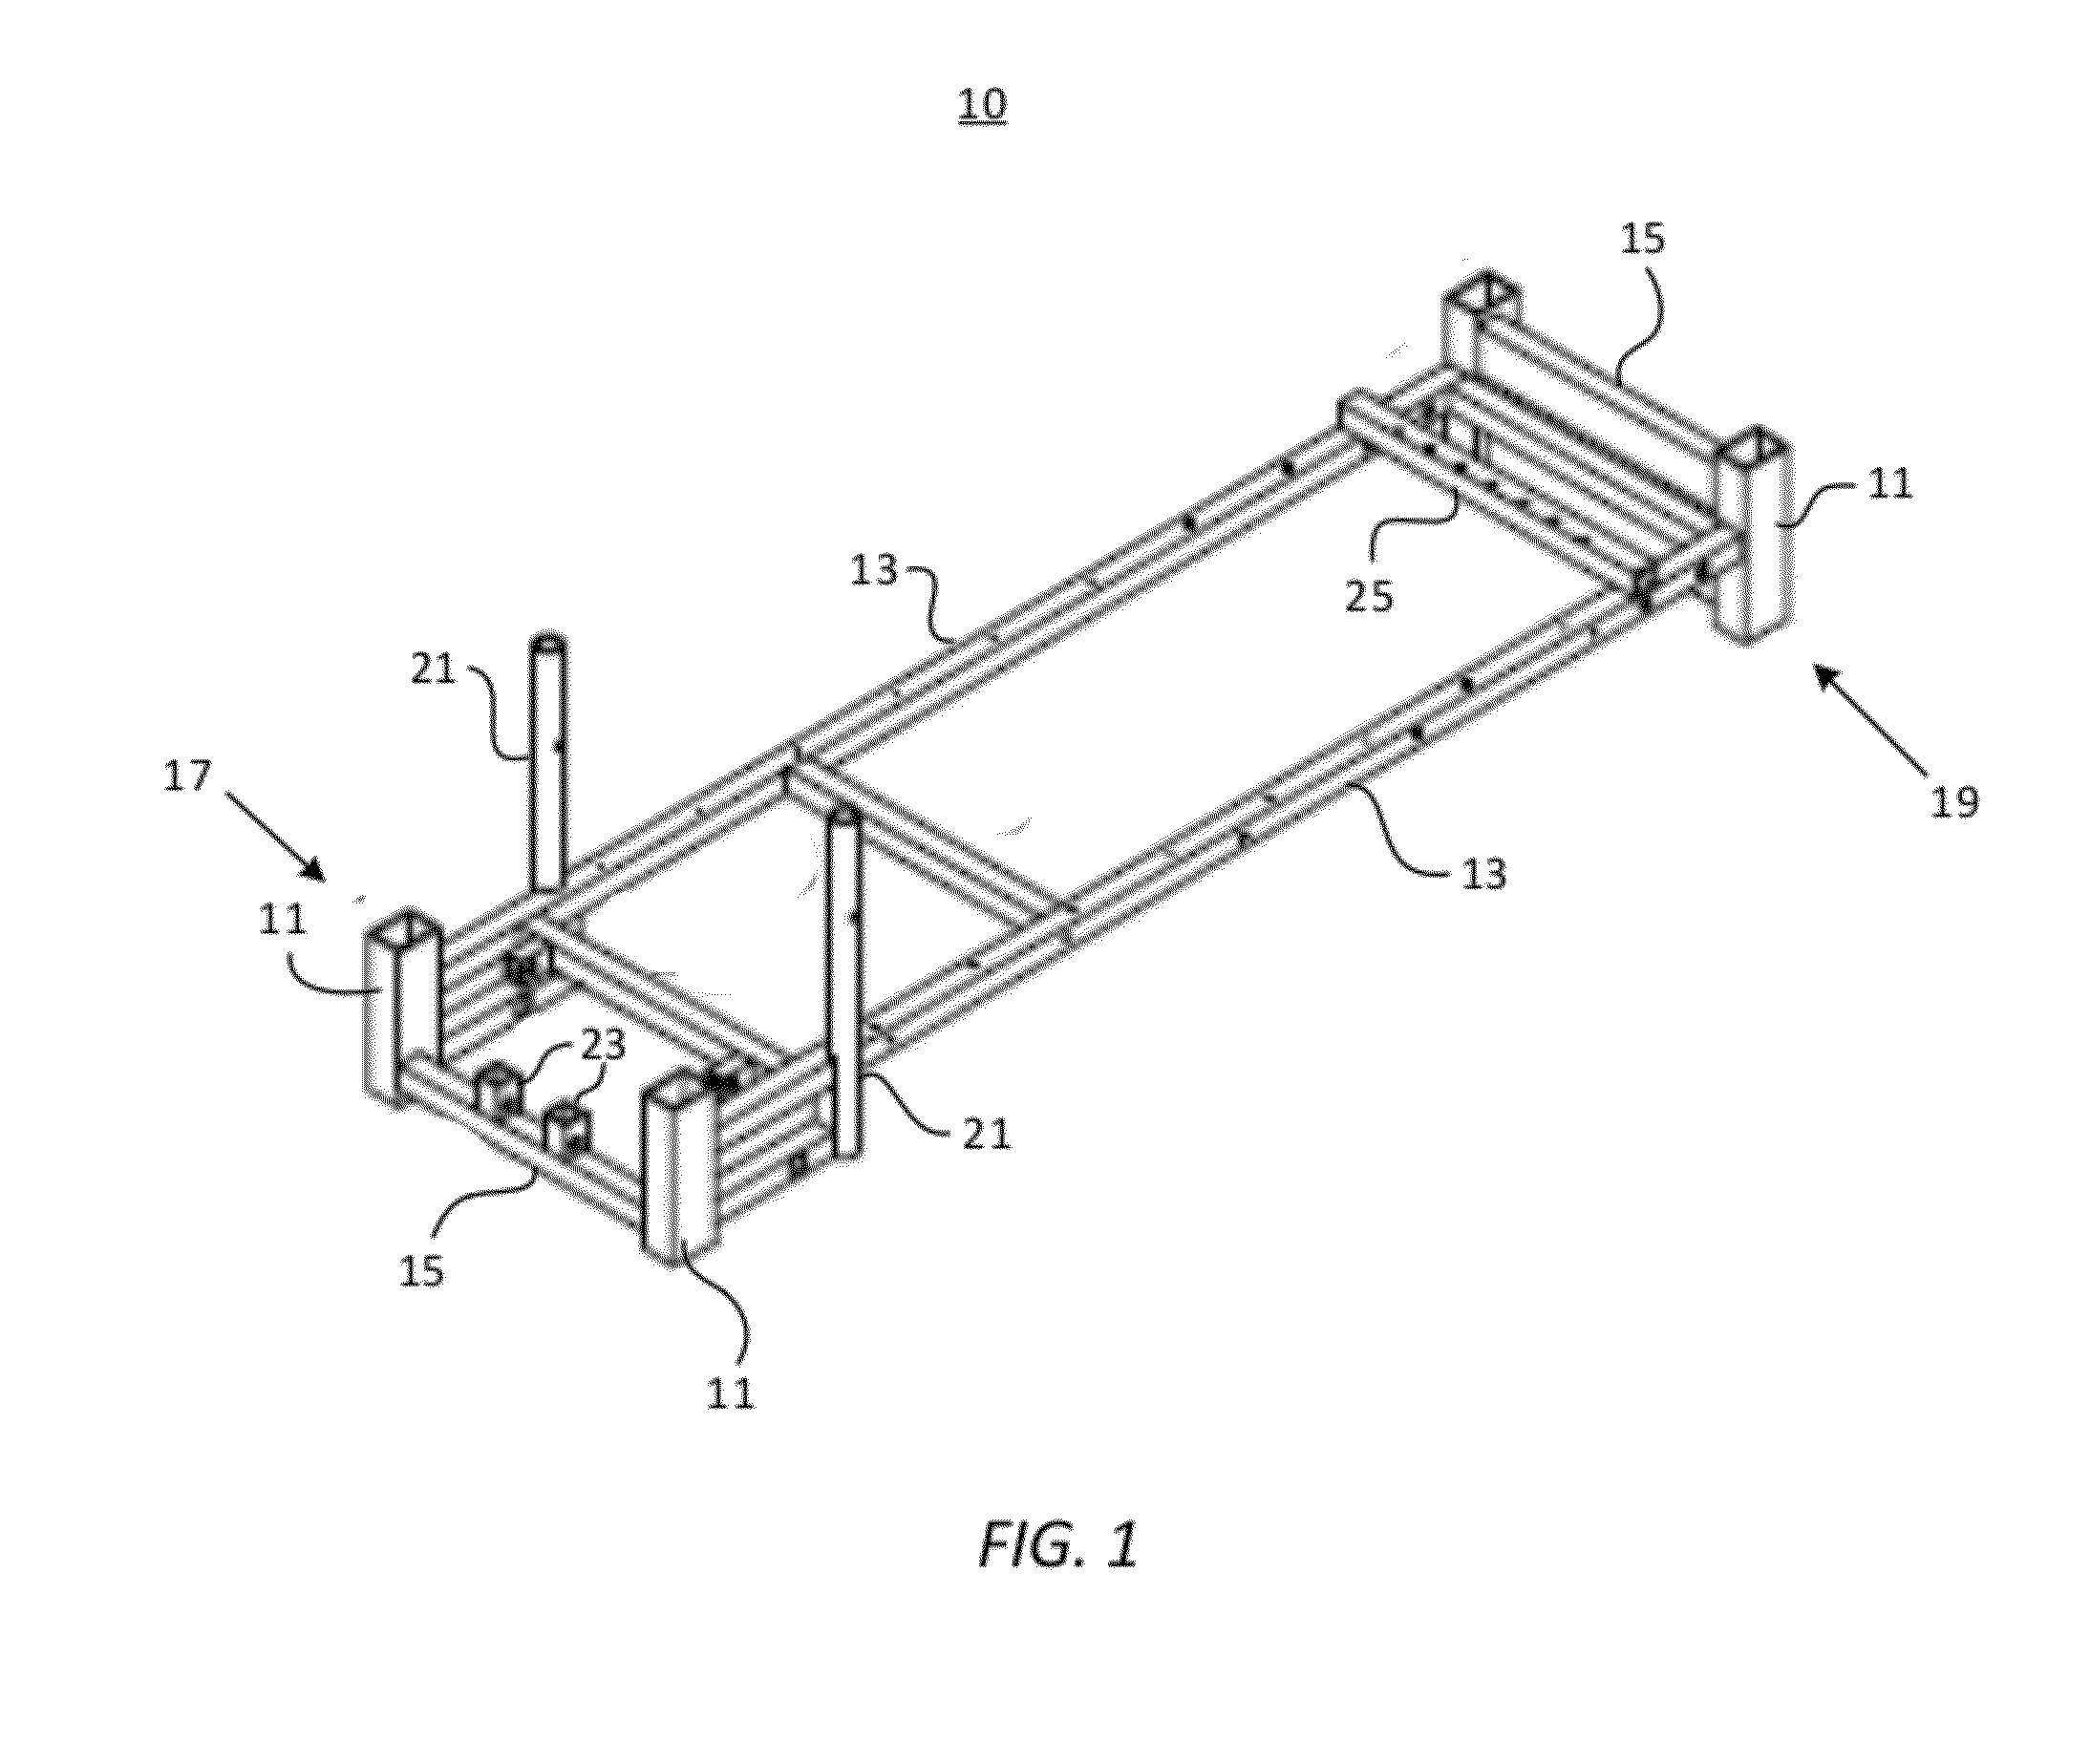 Reformer Apparatus Having Integral Ergonomic Purchase Translatable into Deployed and Stowed Positions